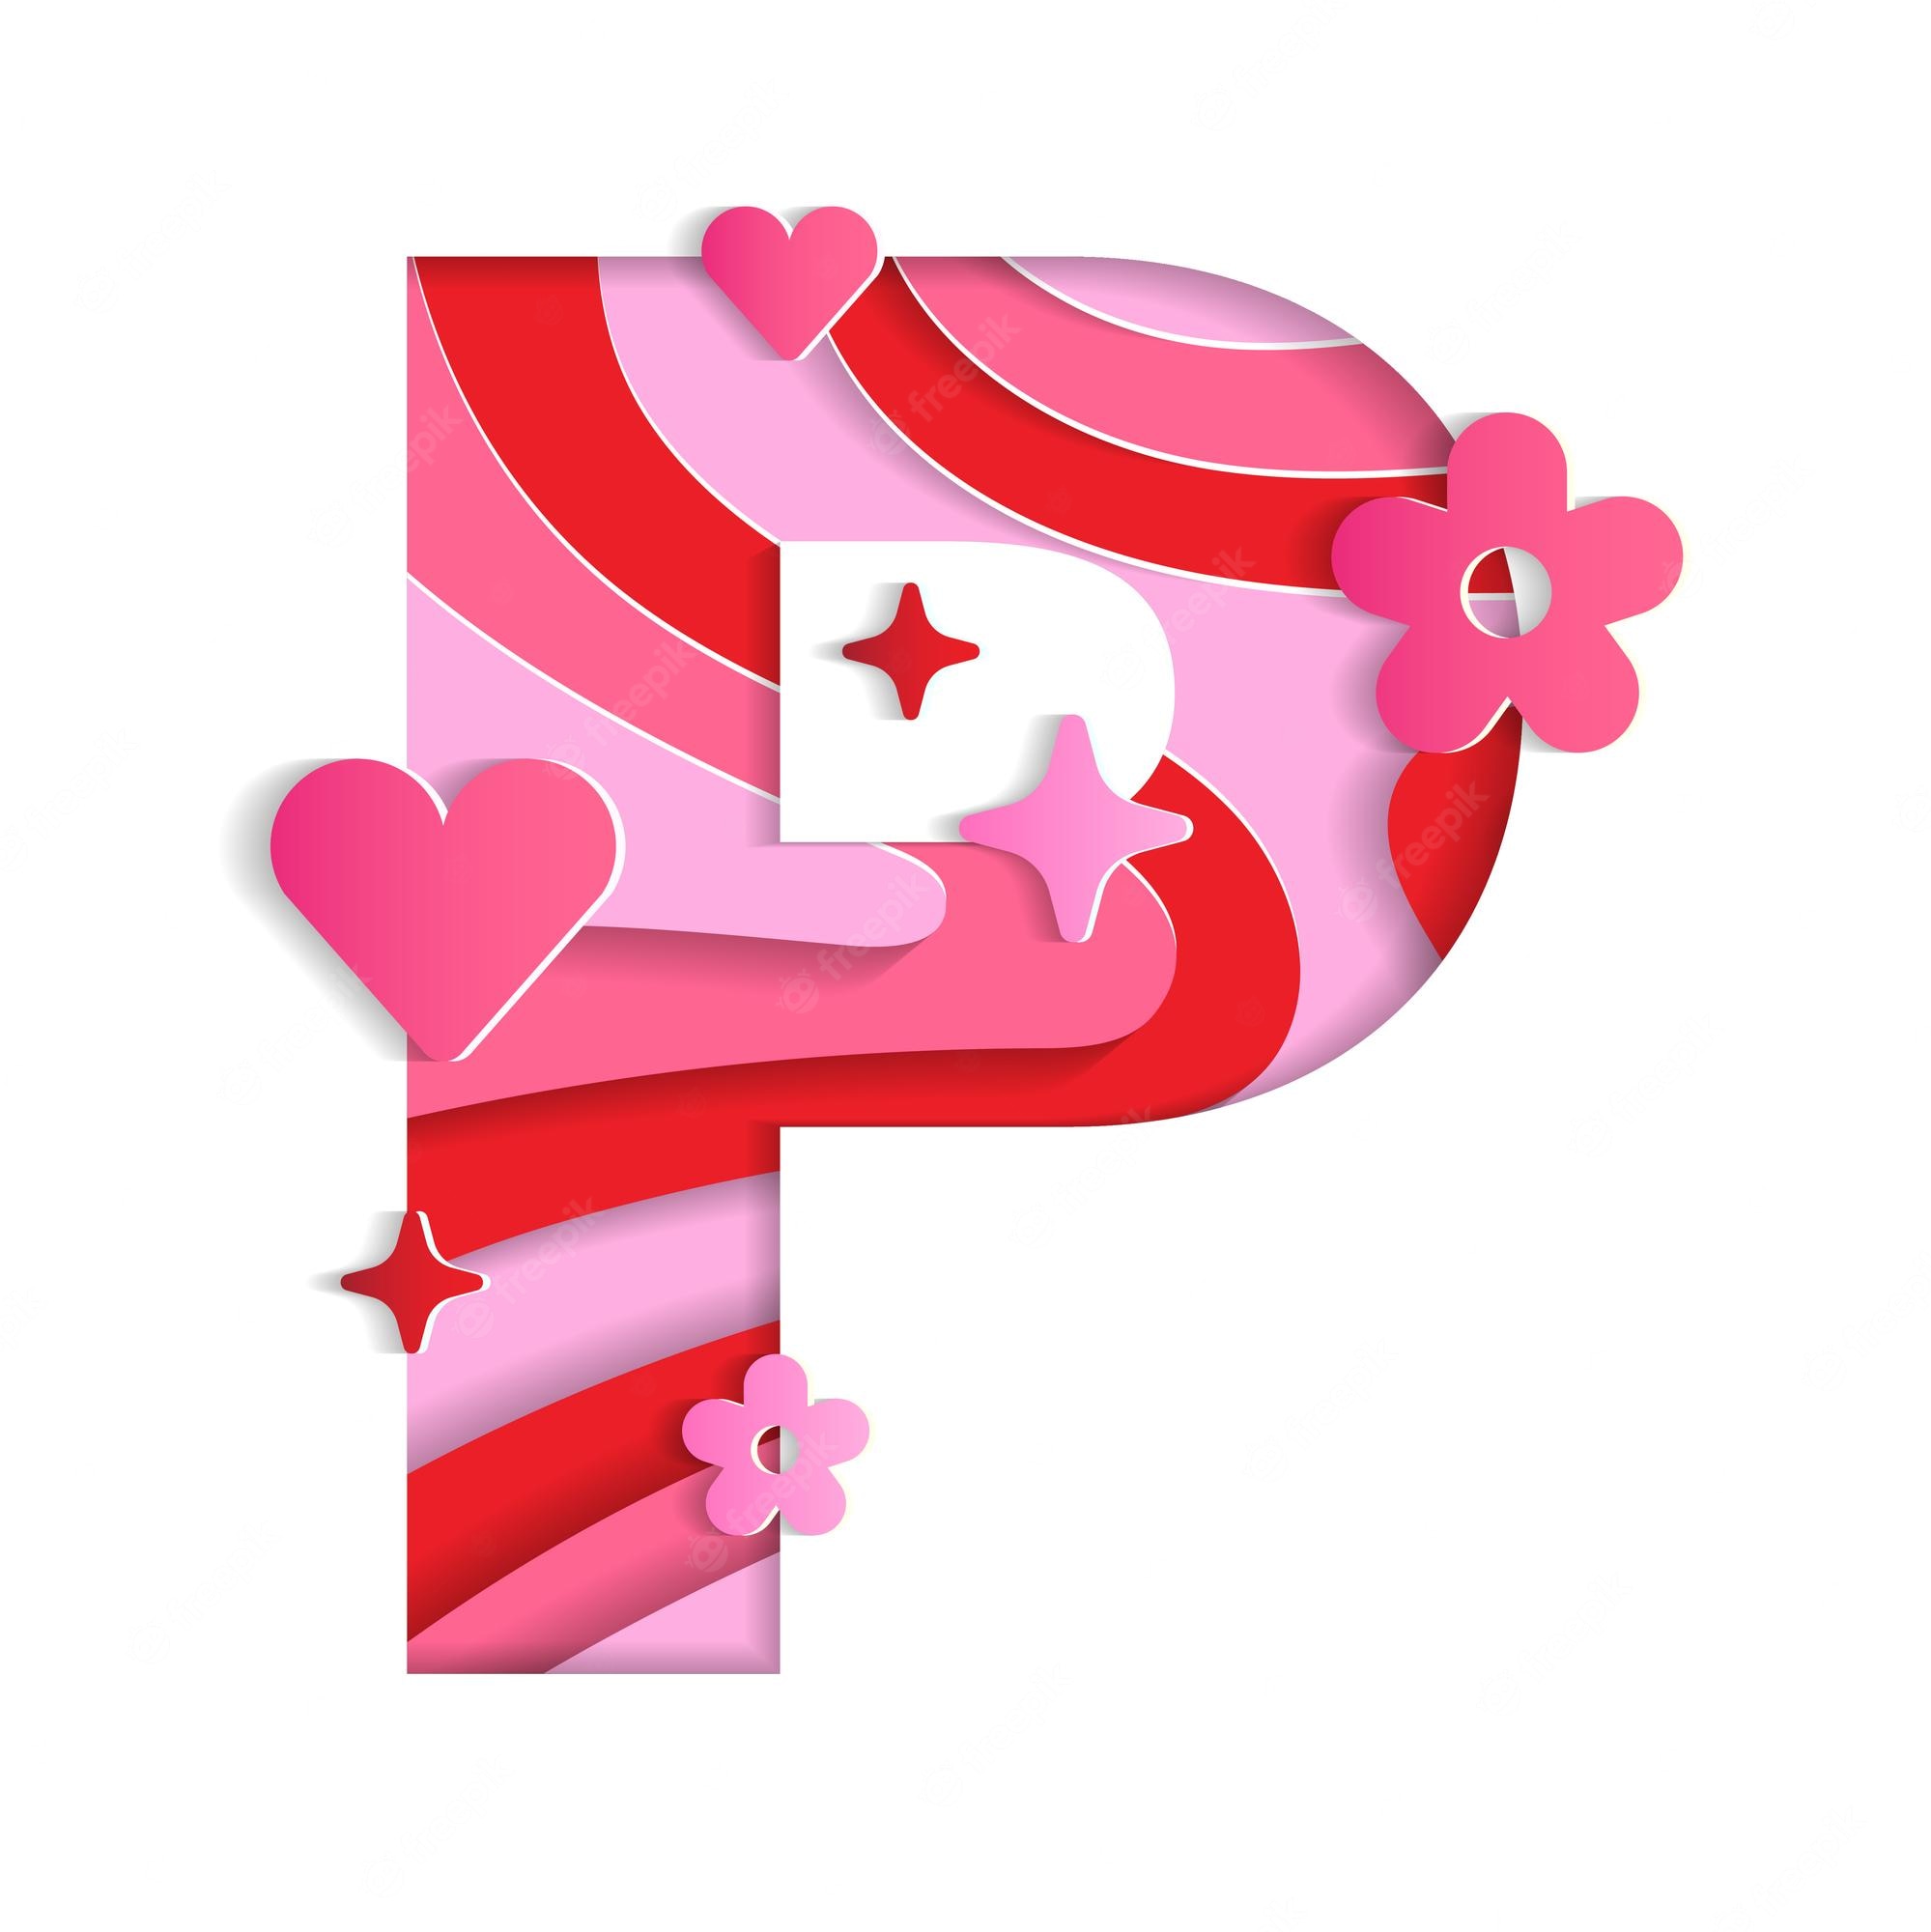 p alphabet valentines day love character font letter paper flower heart 3d layer paper cutout card 307151 962